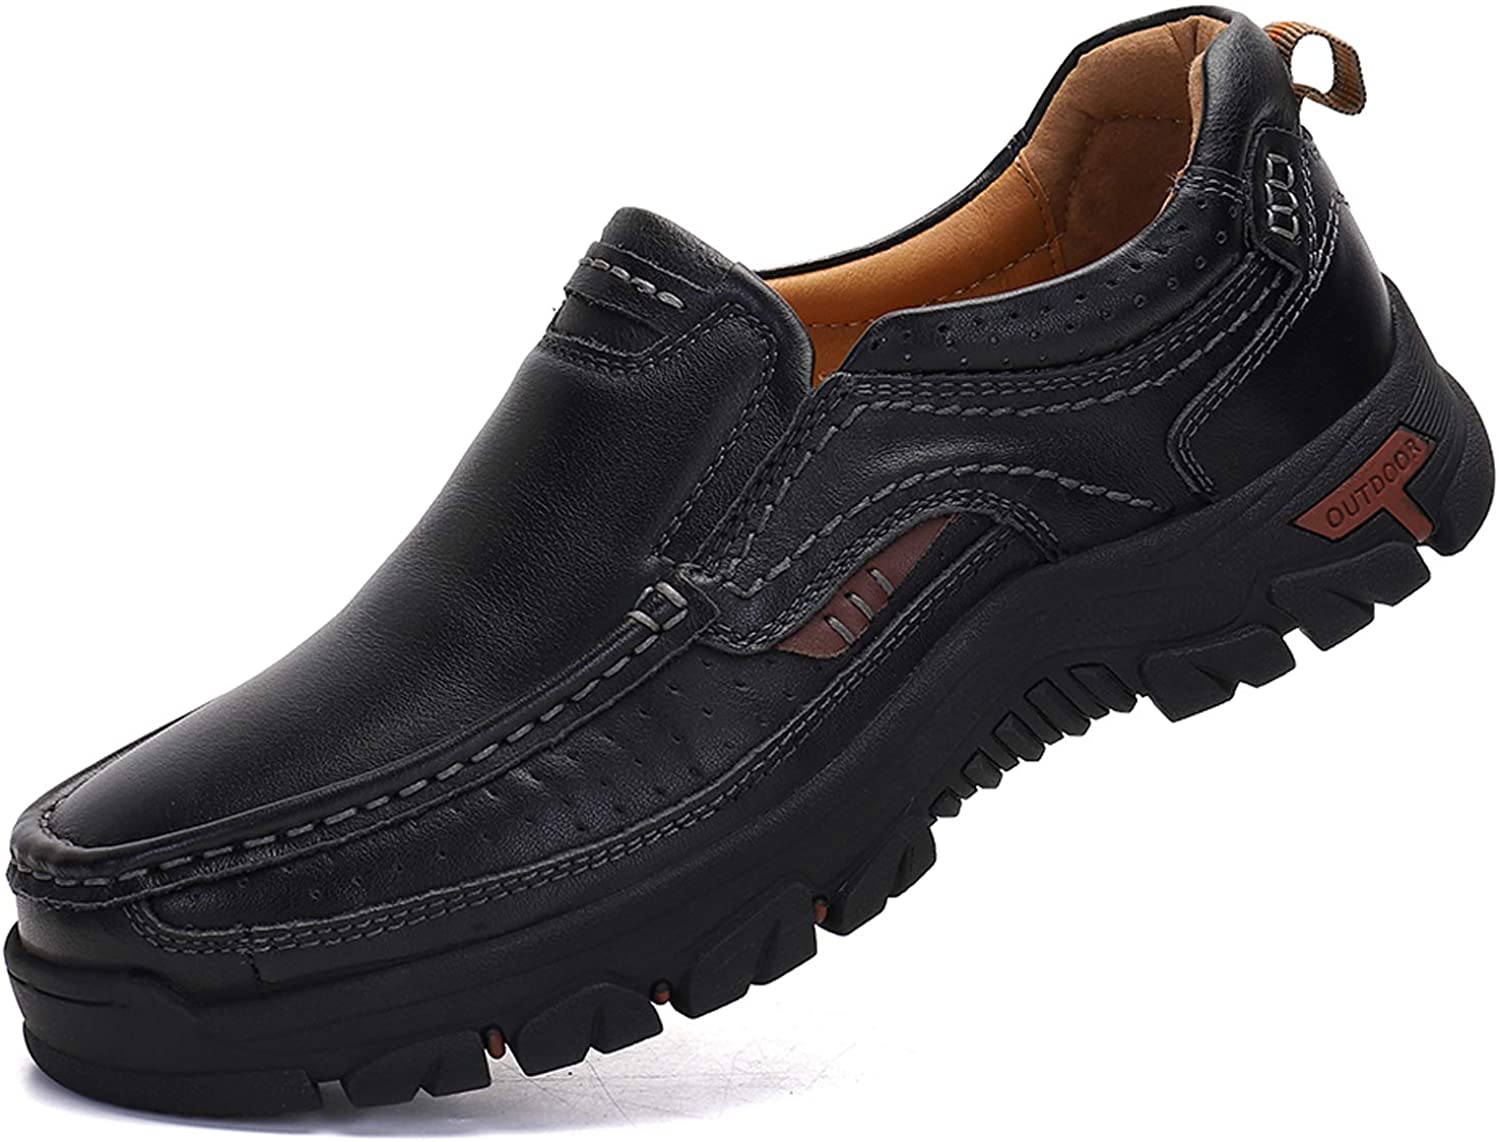 ALITIKAVIC Mens Slip On Casual Shoes Leather Comfortable Walking ...